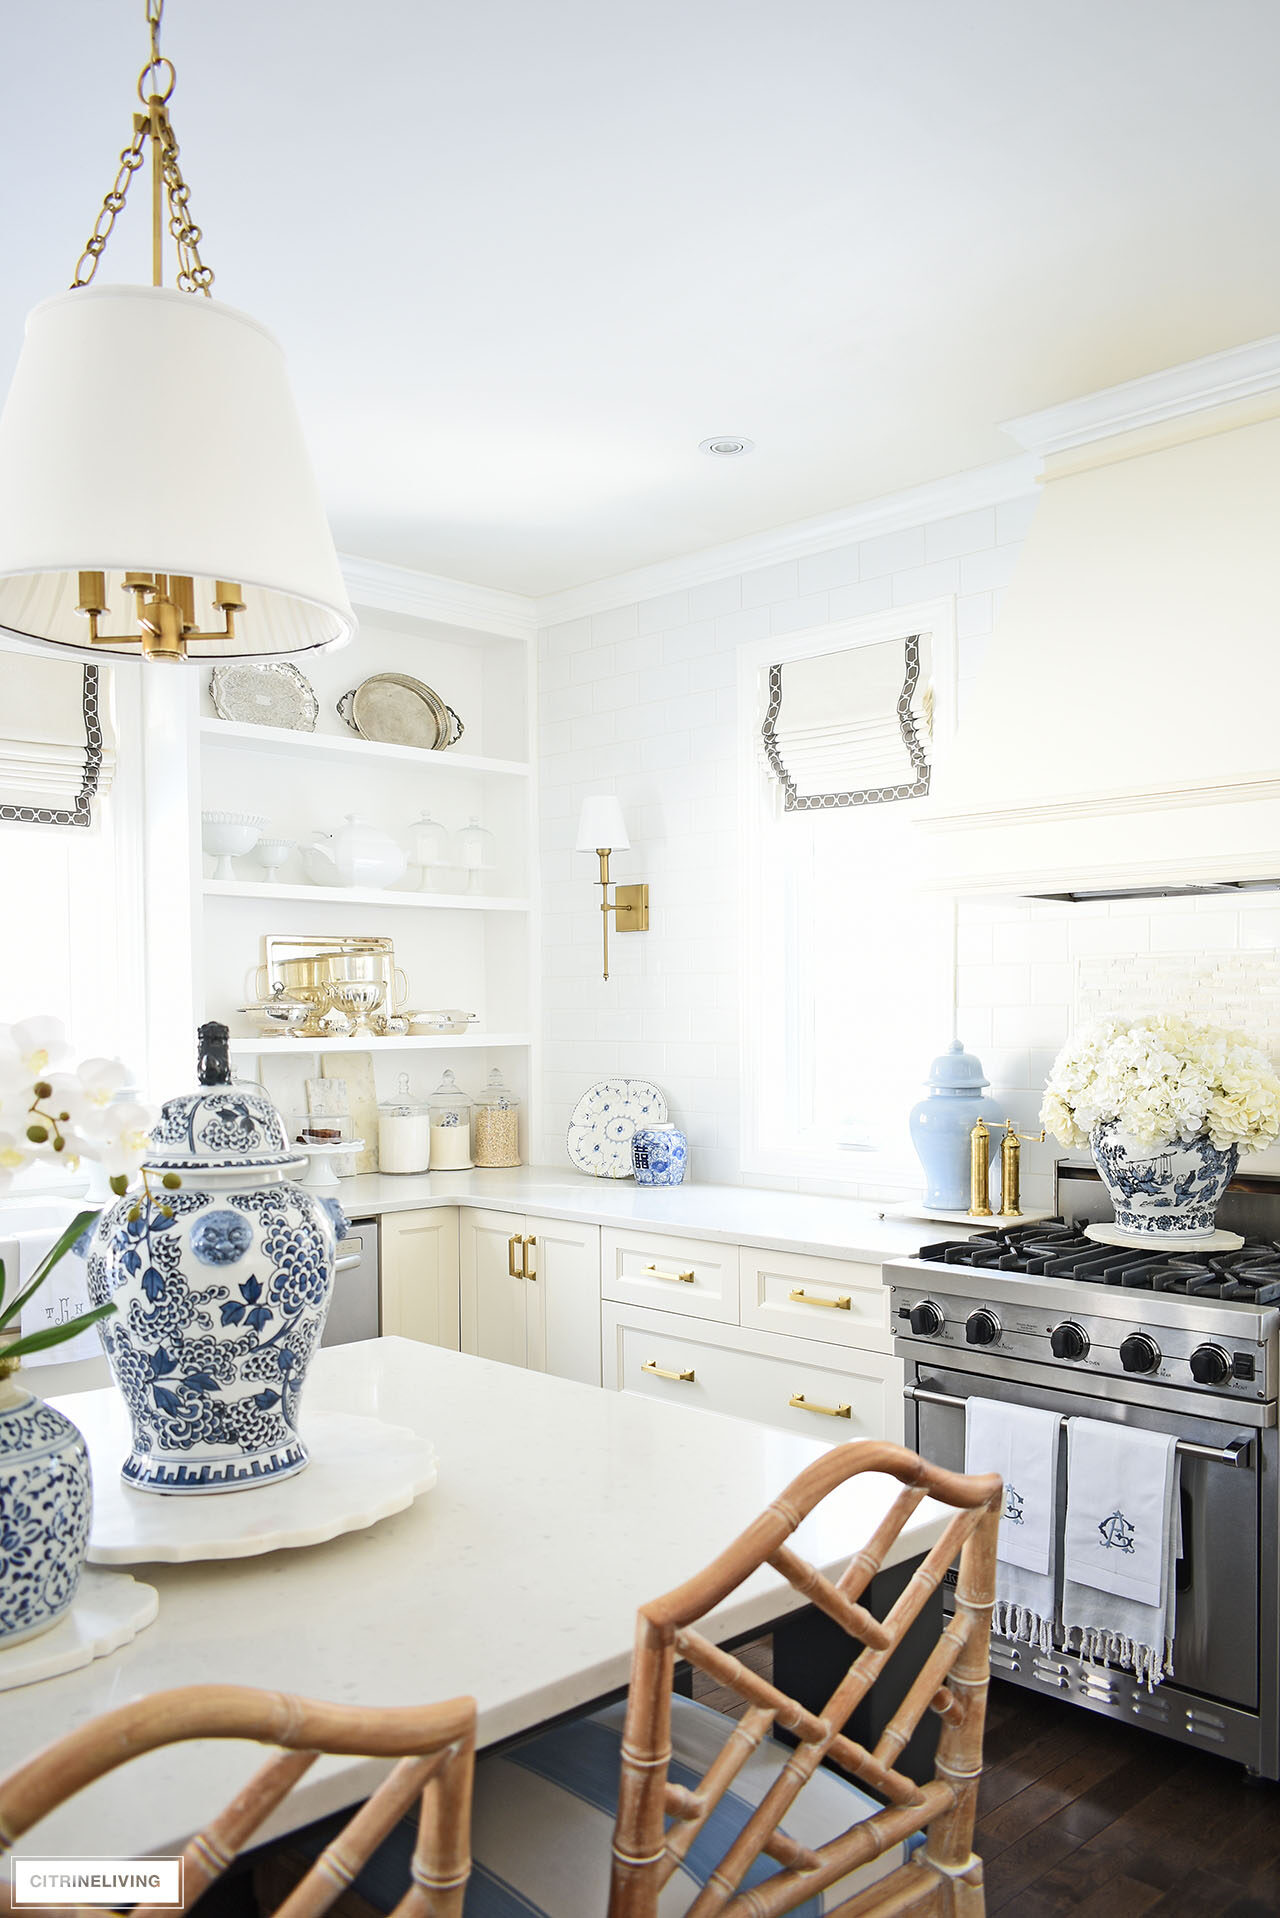 Traditional kitchen decorated for spring with blue and white chinoiserie.